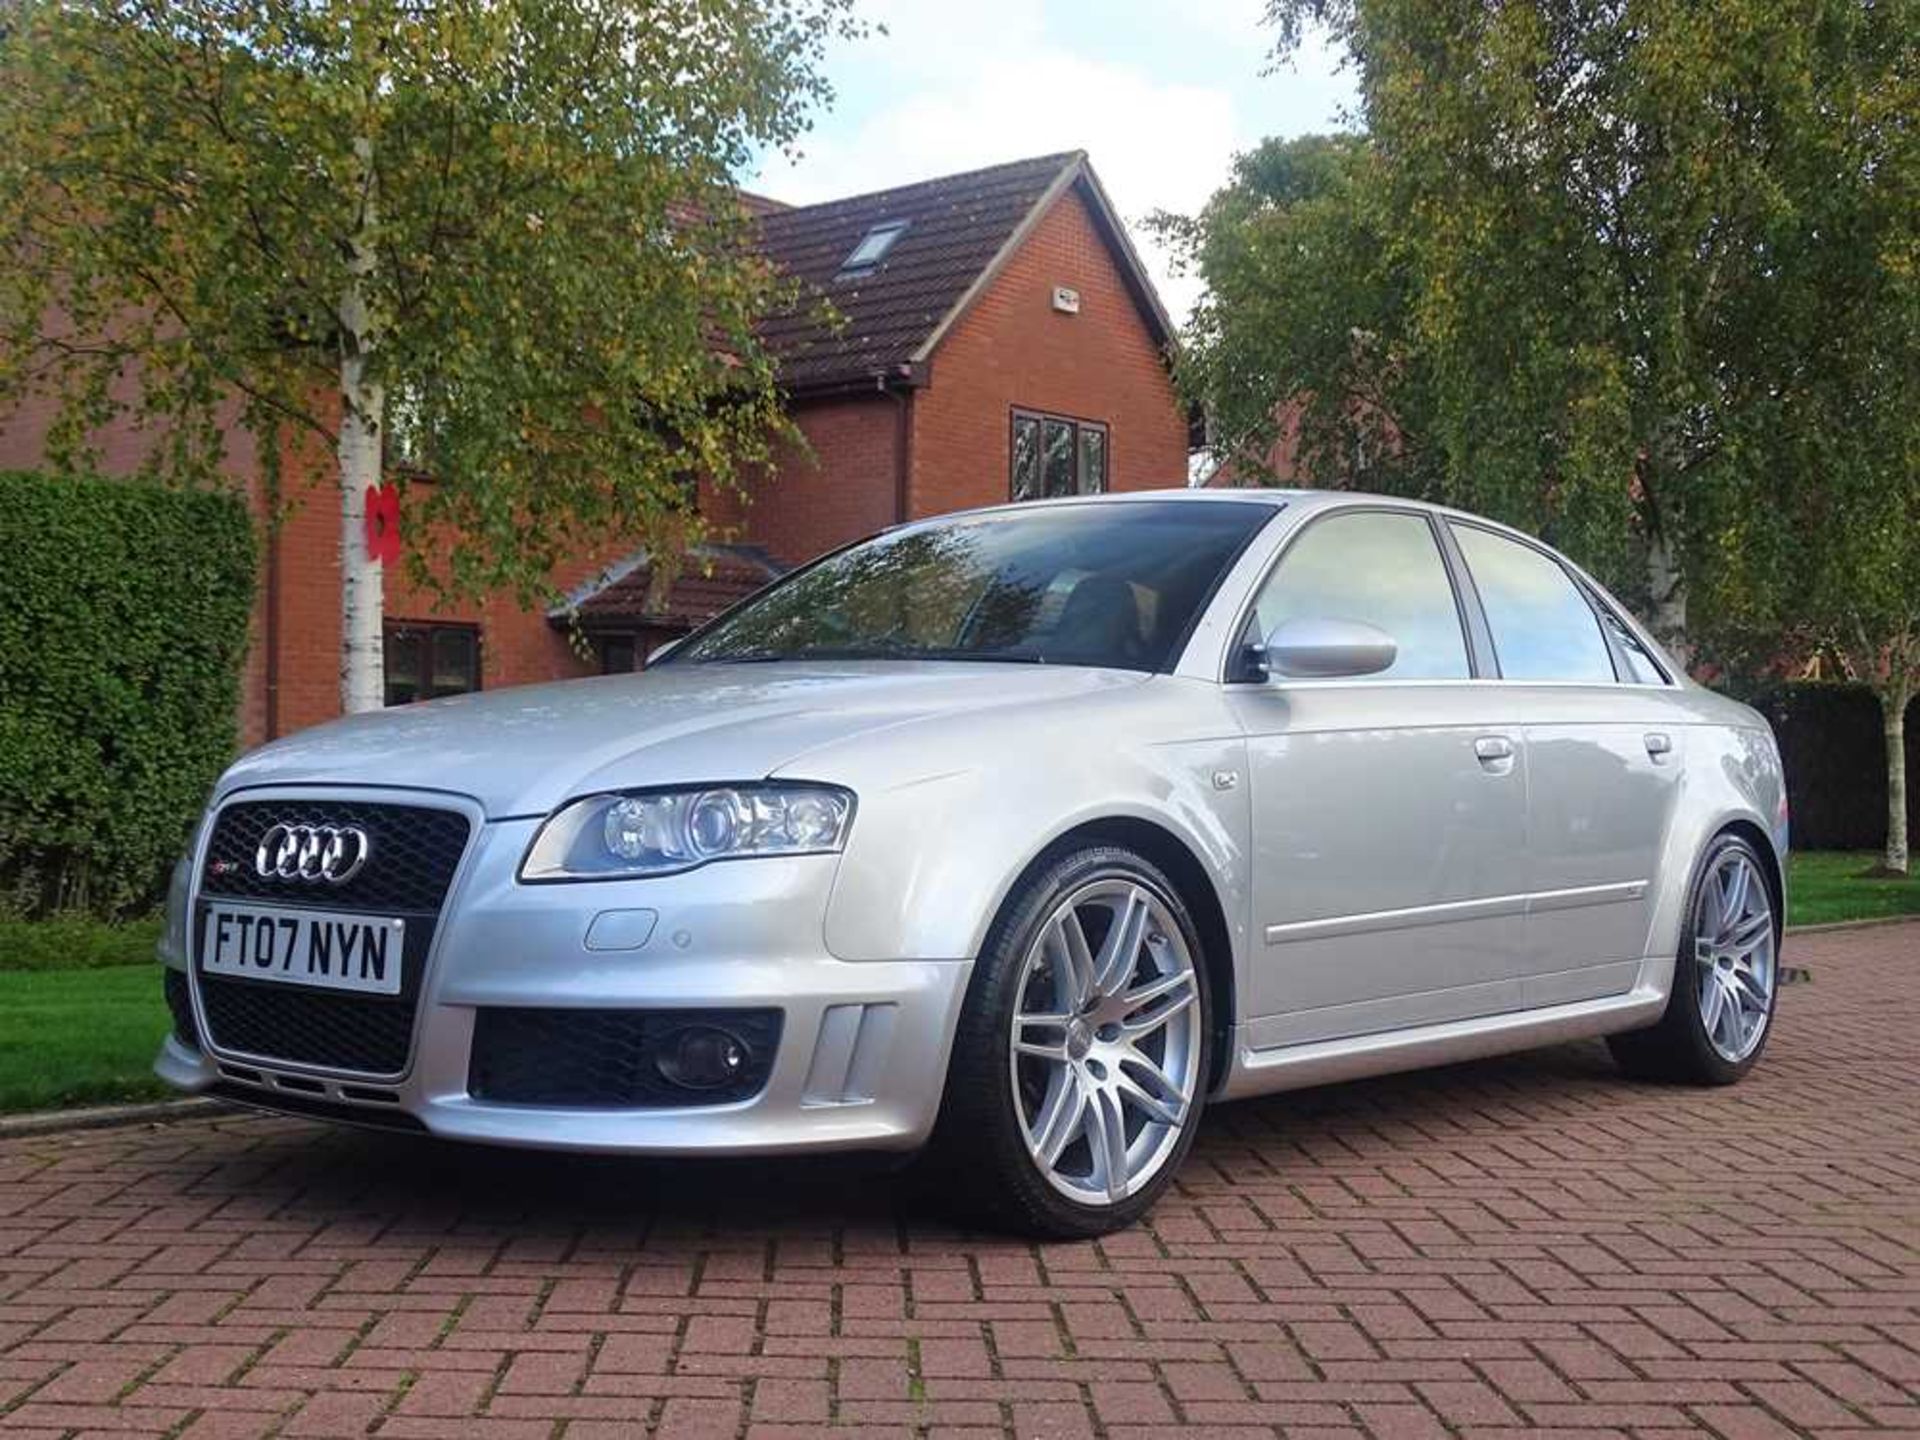 2007 Audi RS4 Saloon One owner and just c.60,000 miles from new - Image 70 of 86